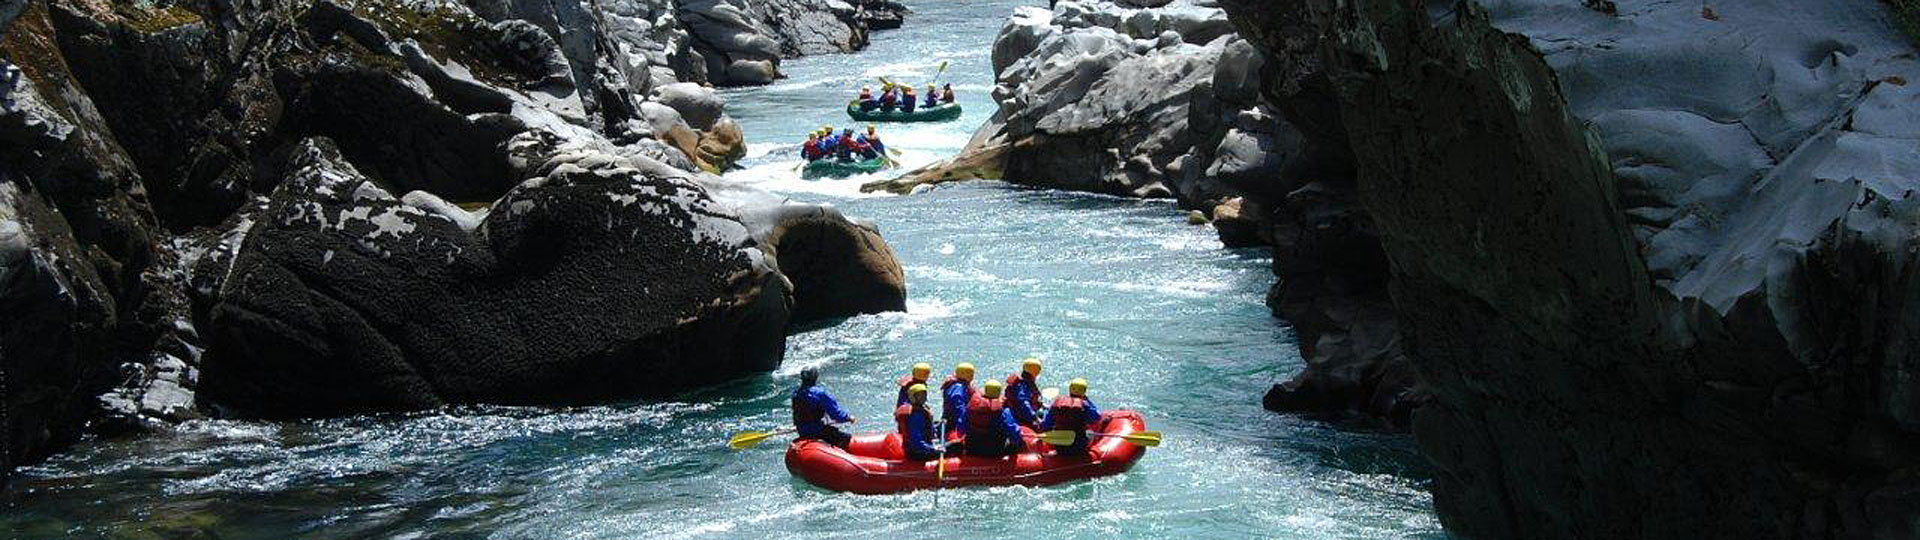 Extremo Sur - River Manso Expedition